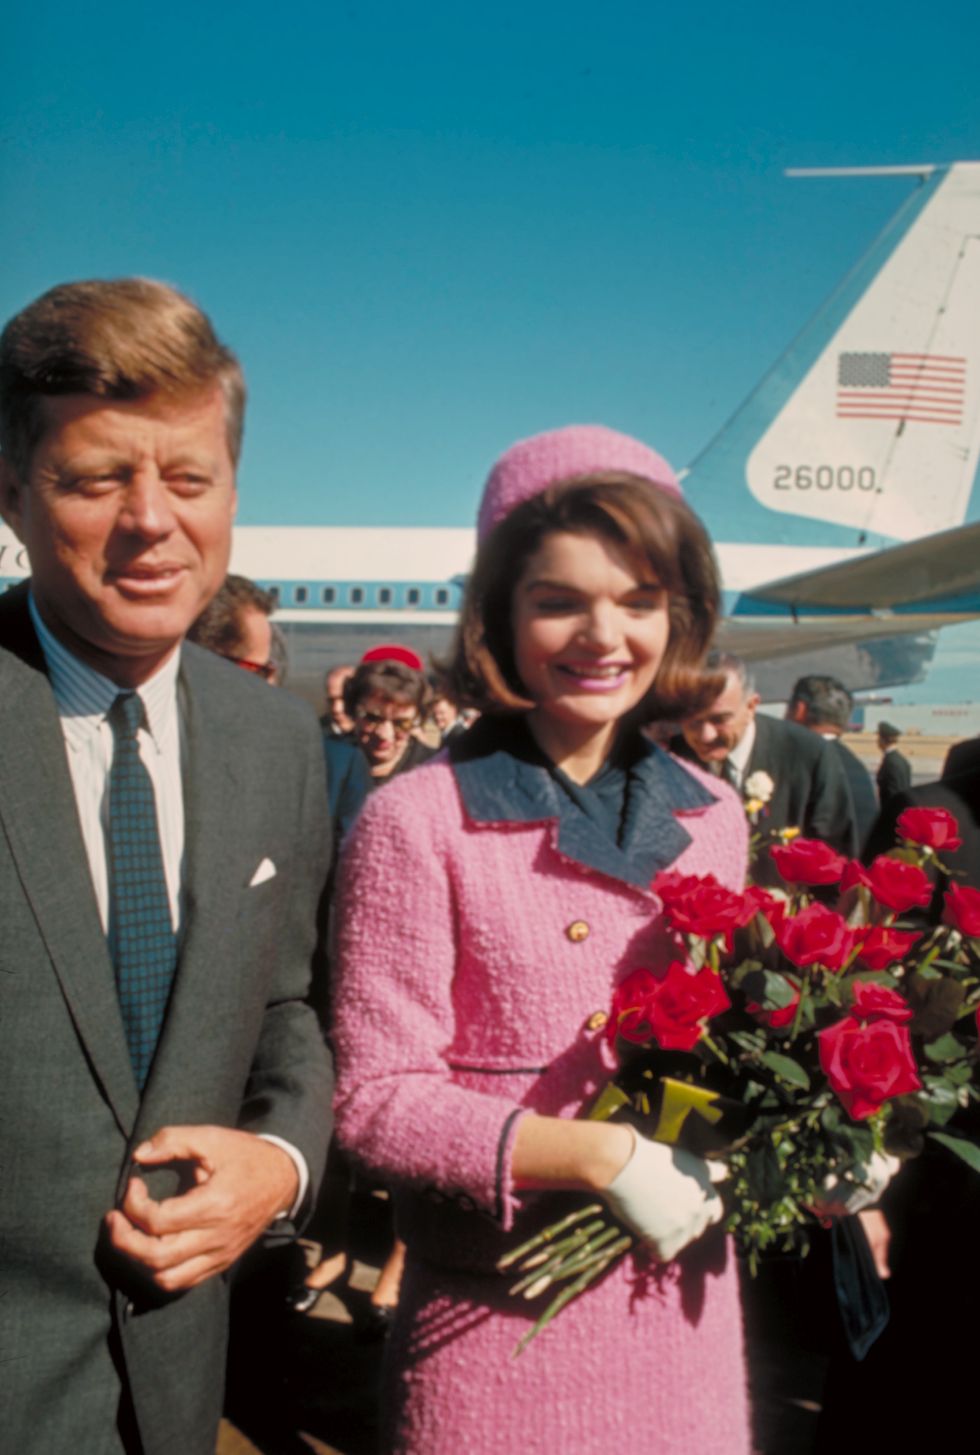 jfk and jackie in dallas